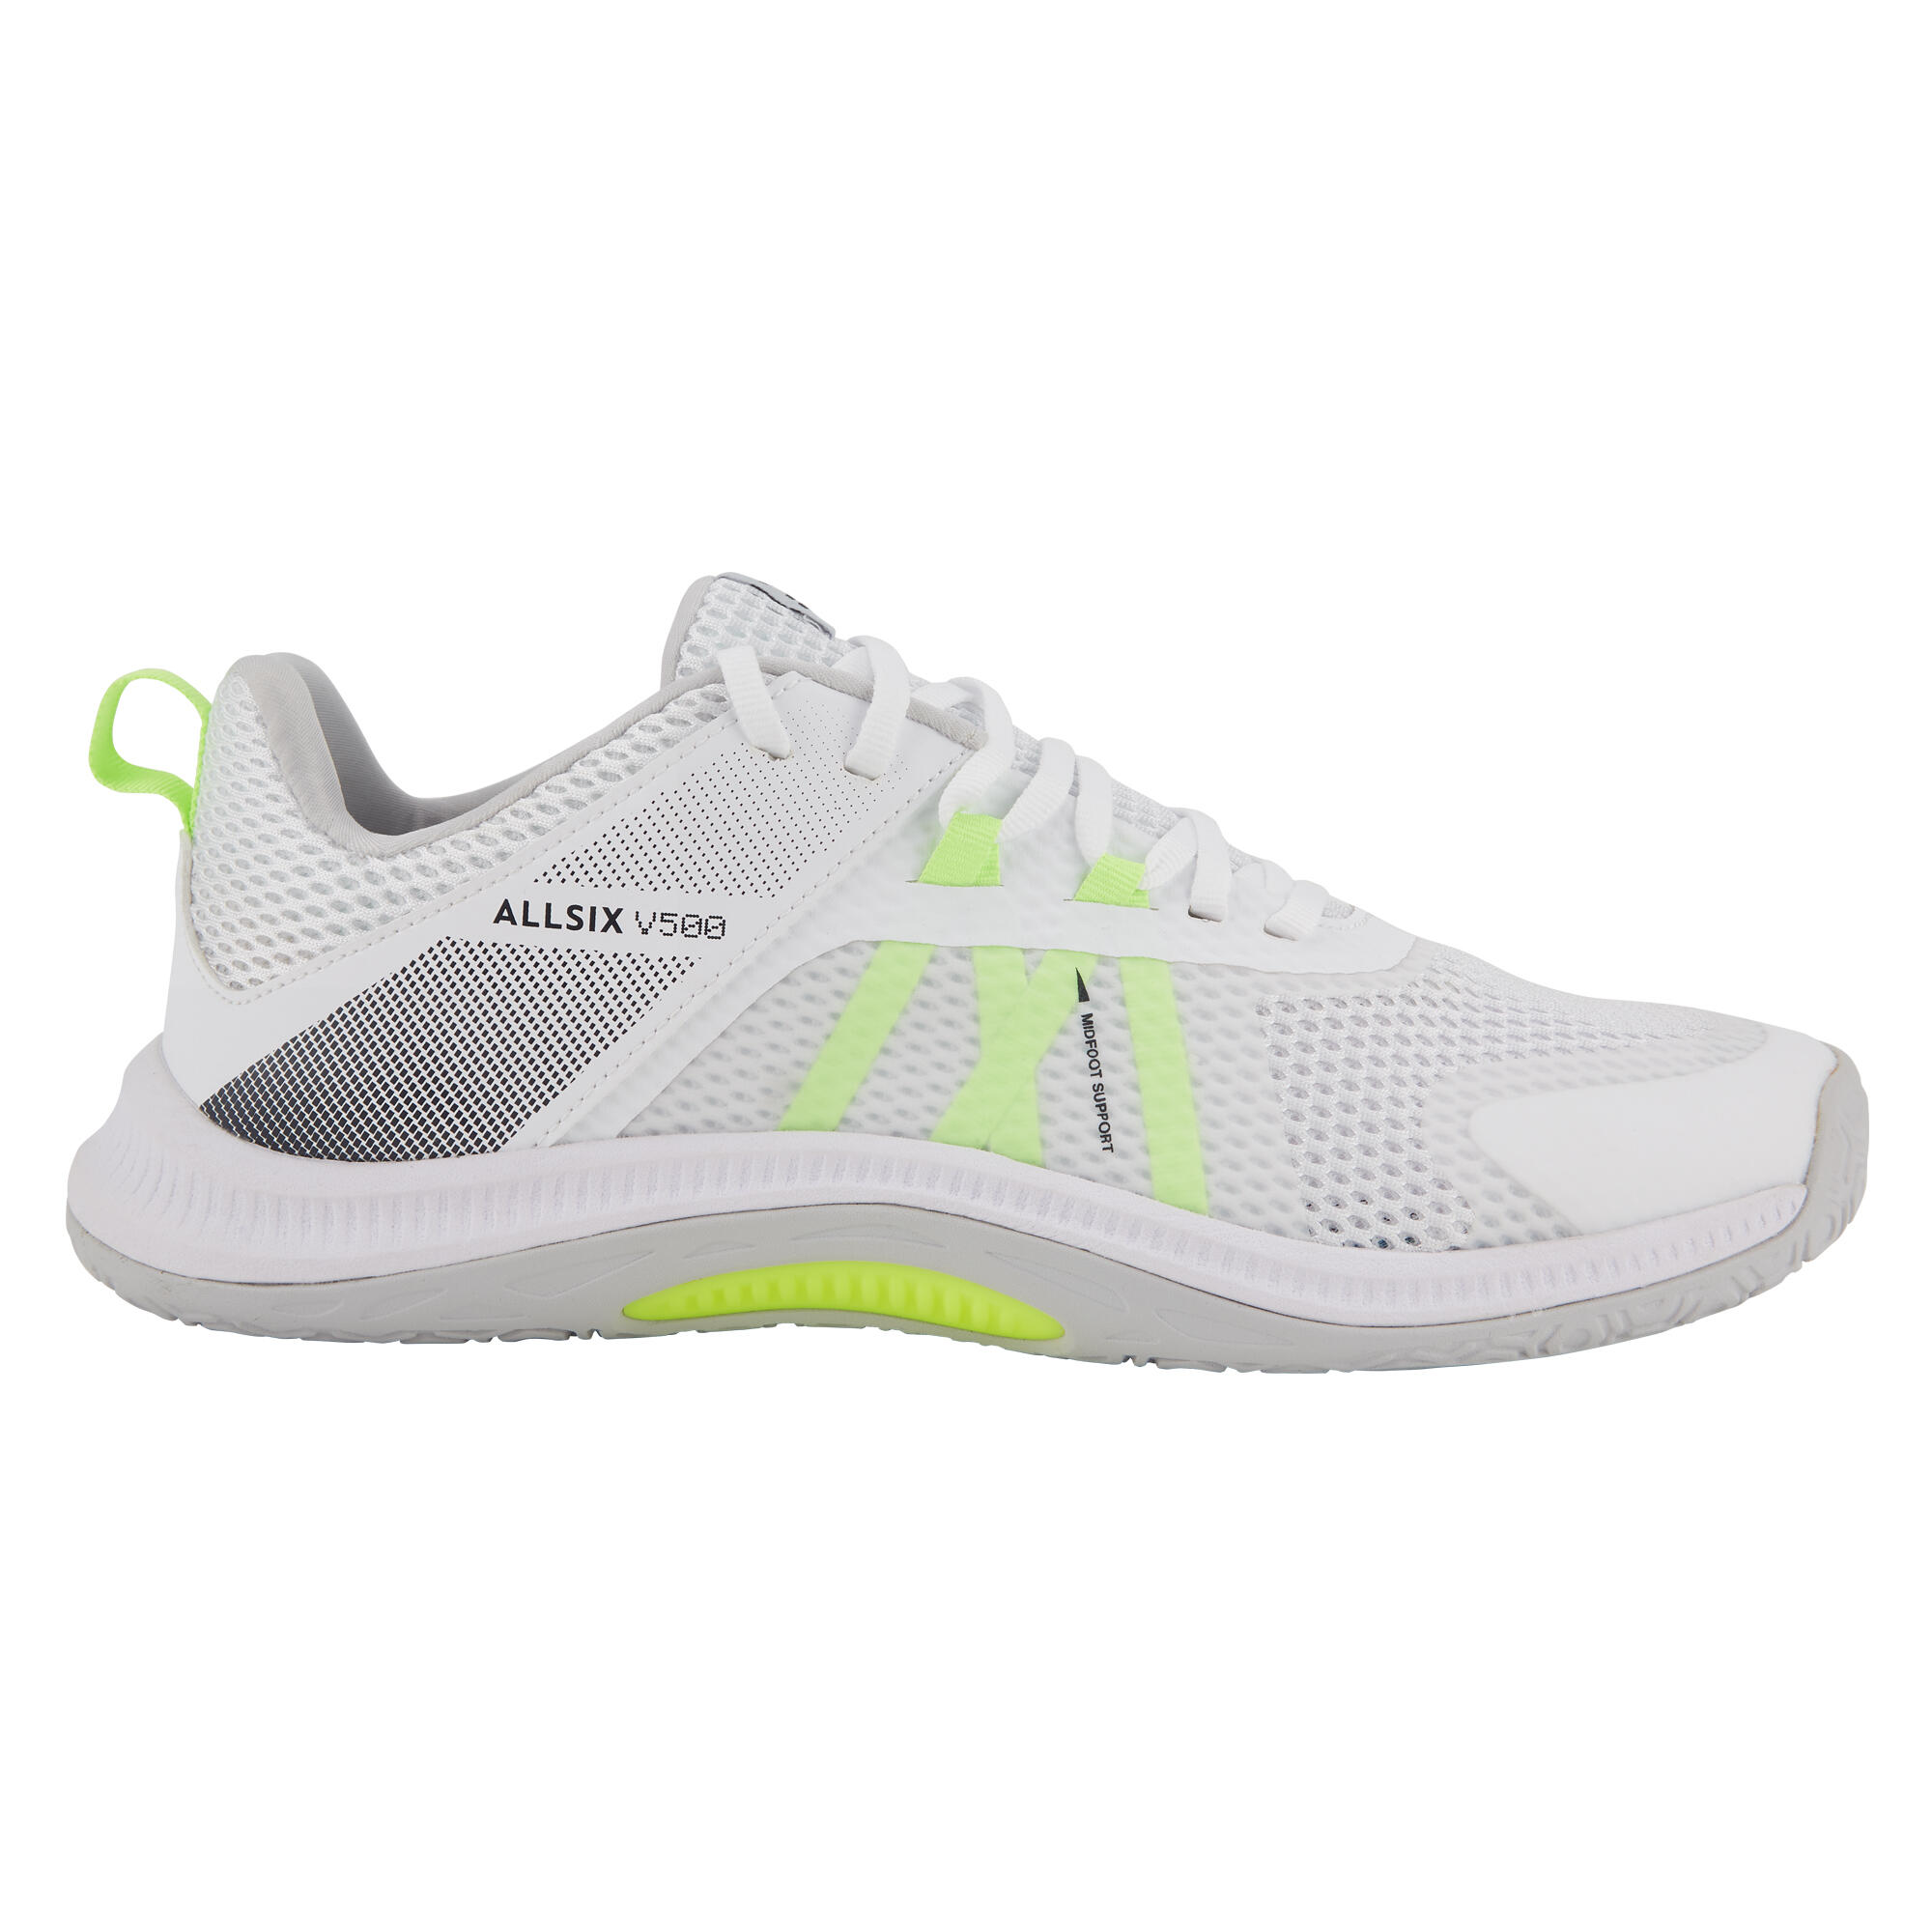 ALLSIX Unisex Volleyball Shoes - White/Yellow